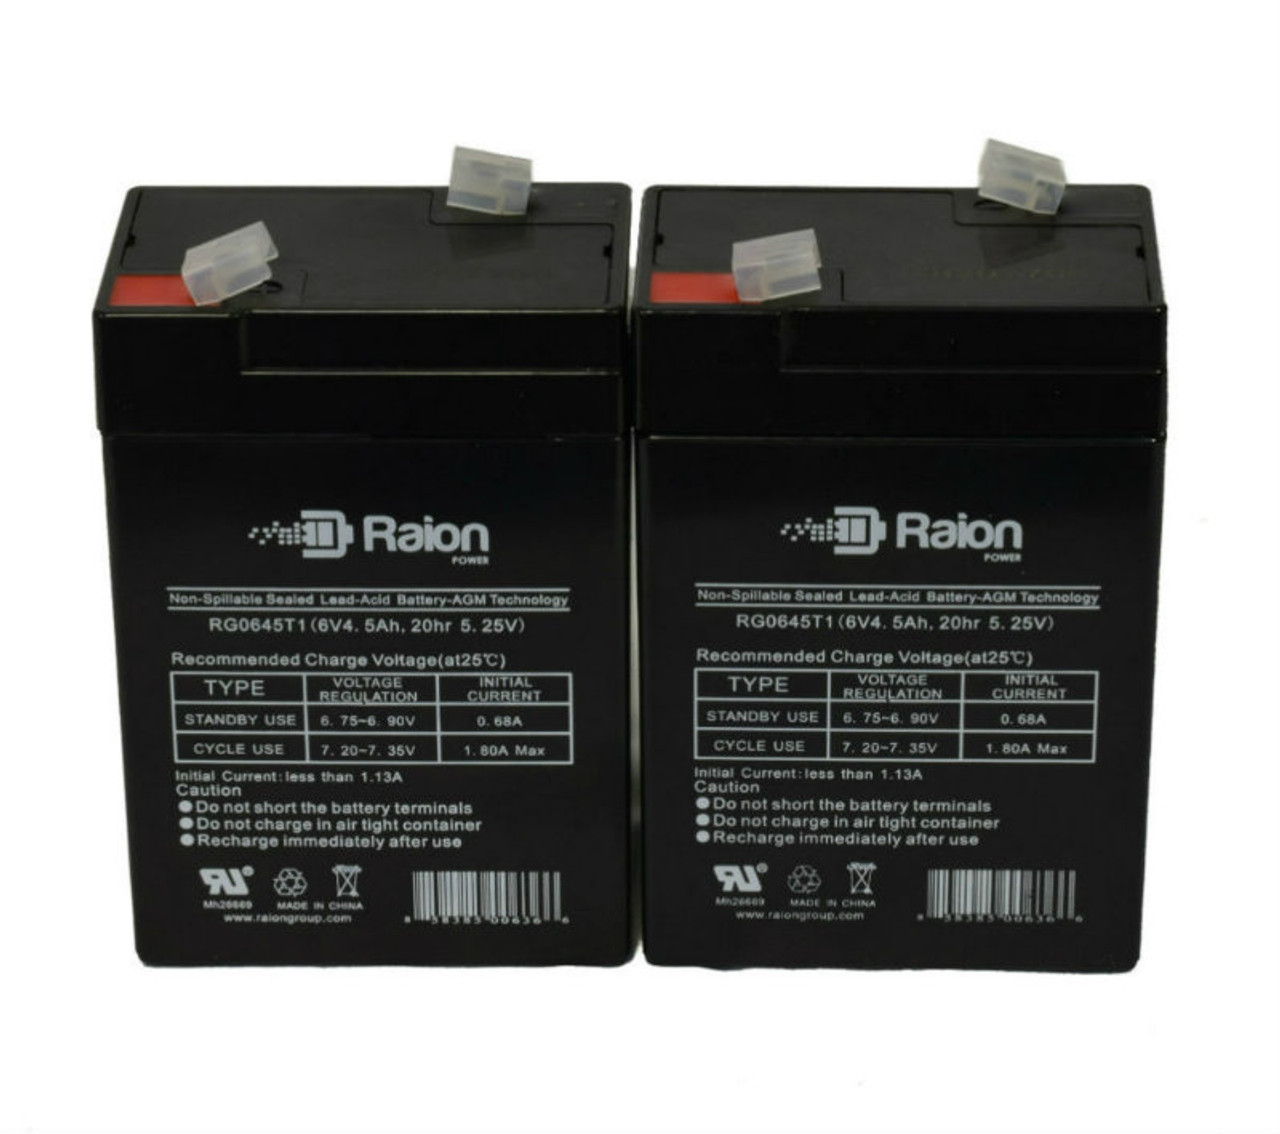 Raion Power RG0645T1 6V 4.5Ah Replacement Battery Cartridge for Costzon 12V Licensed Audi TT RS Ride On Car - 2 Pack